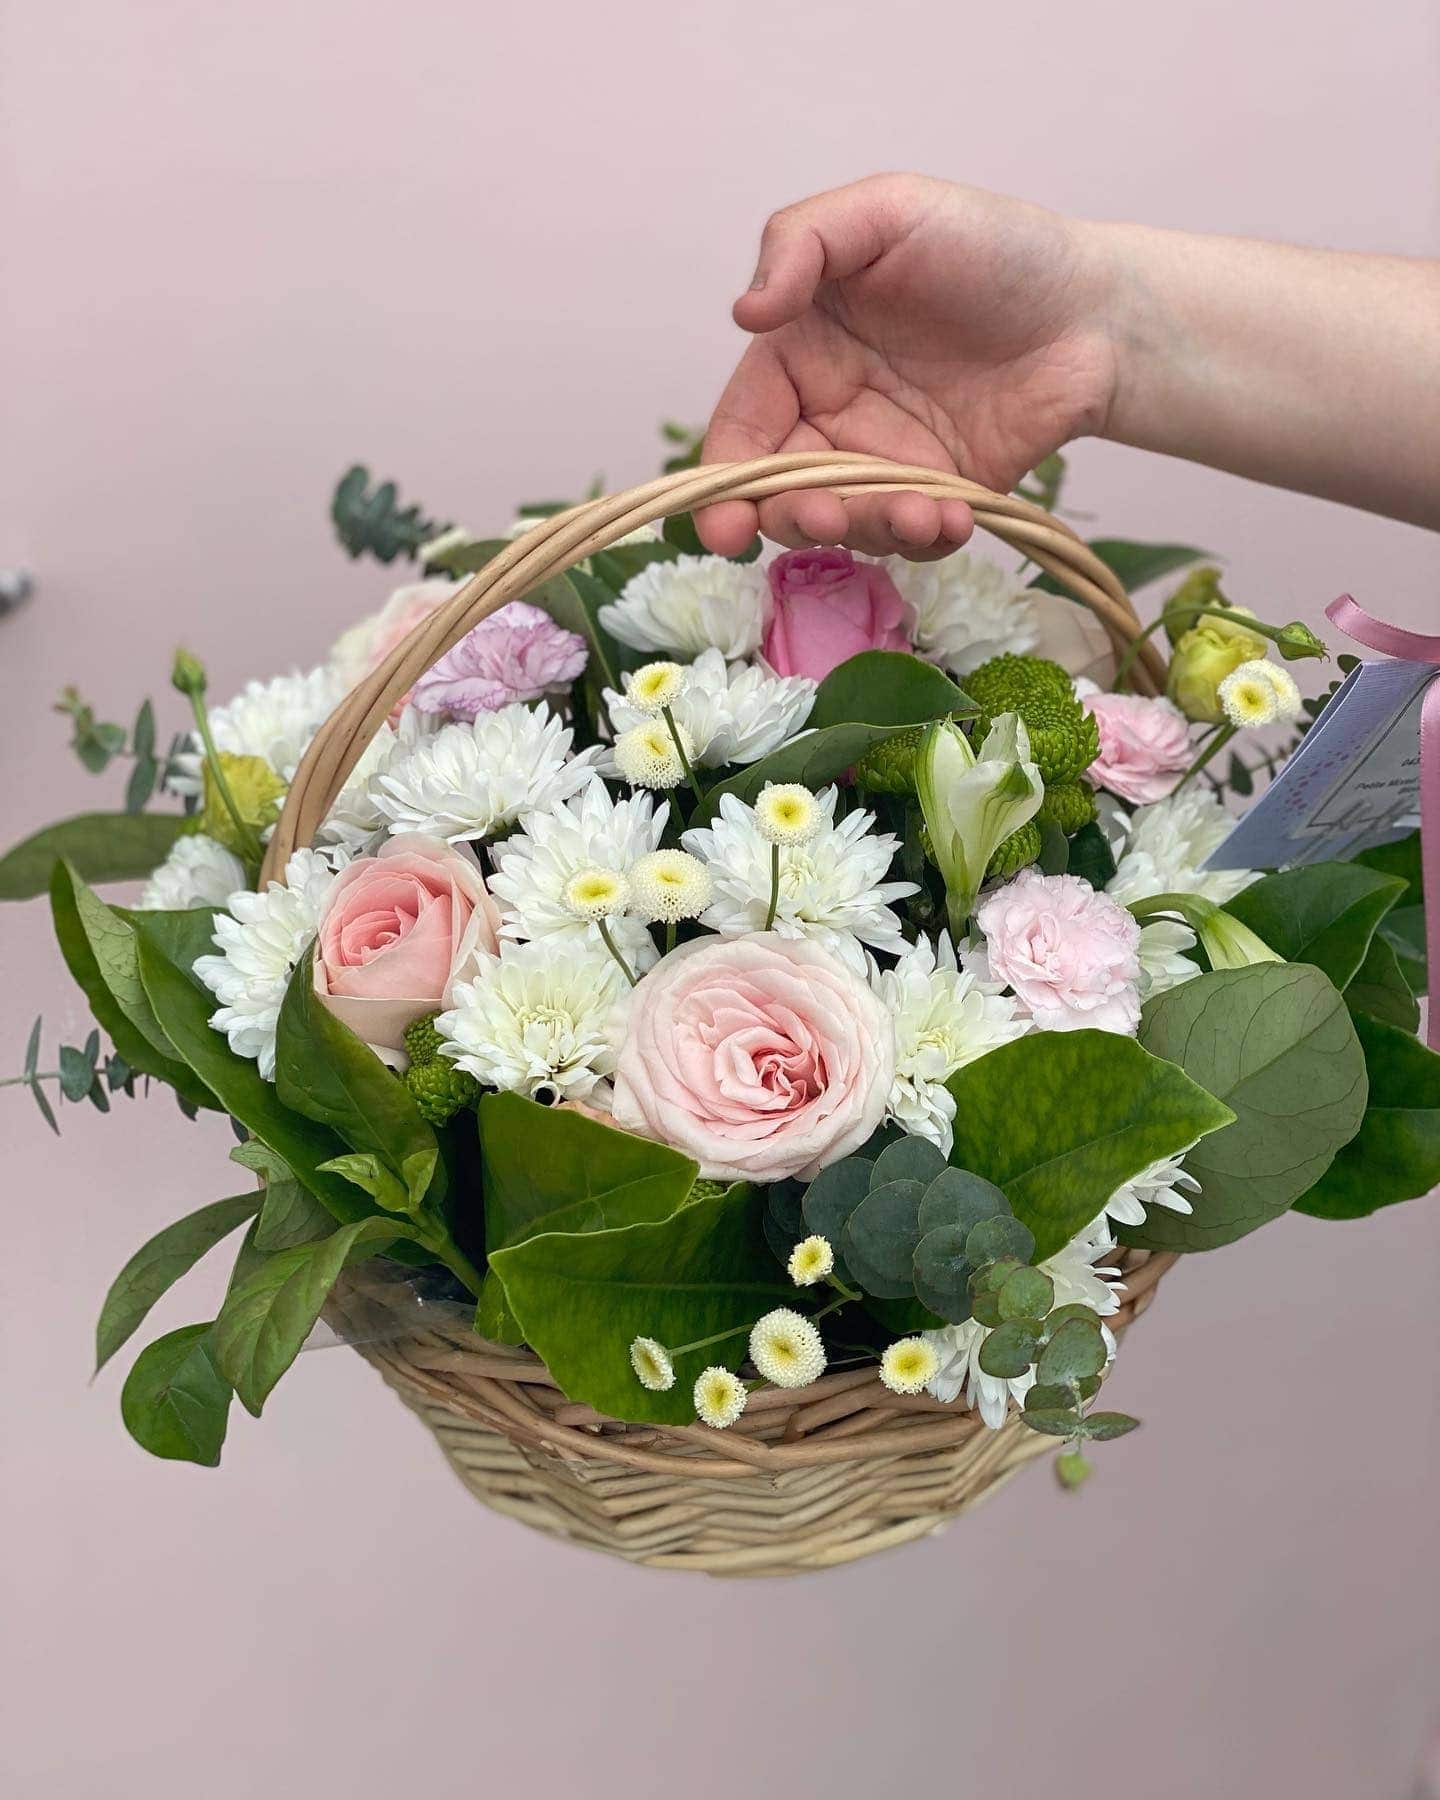 Flower delivery Melbourne - The little market bunch - Brooklyn, AU, flowers delivery in melbourne